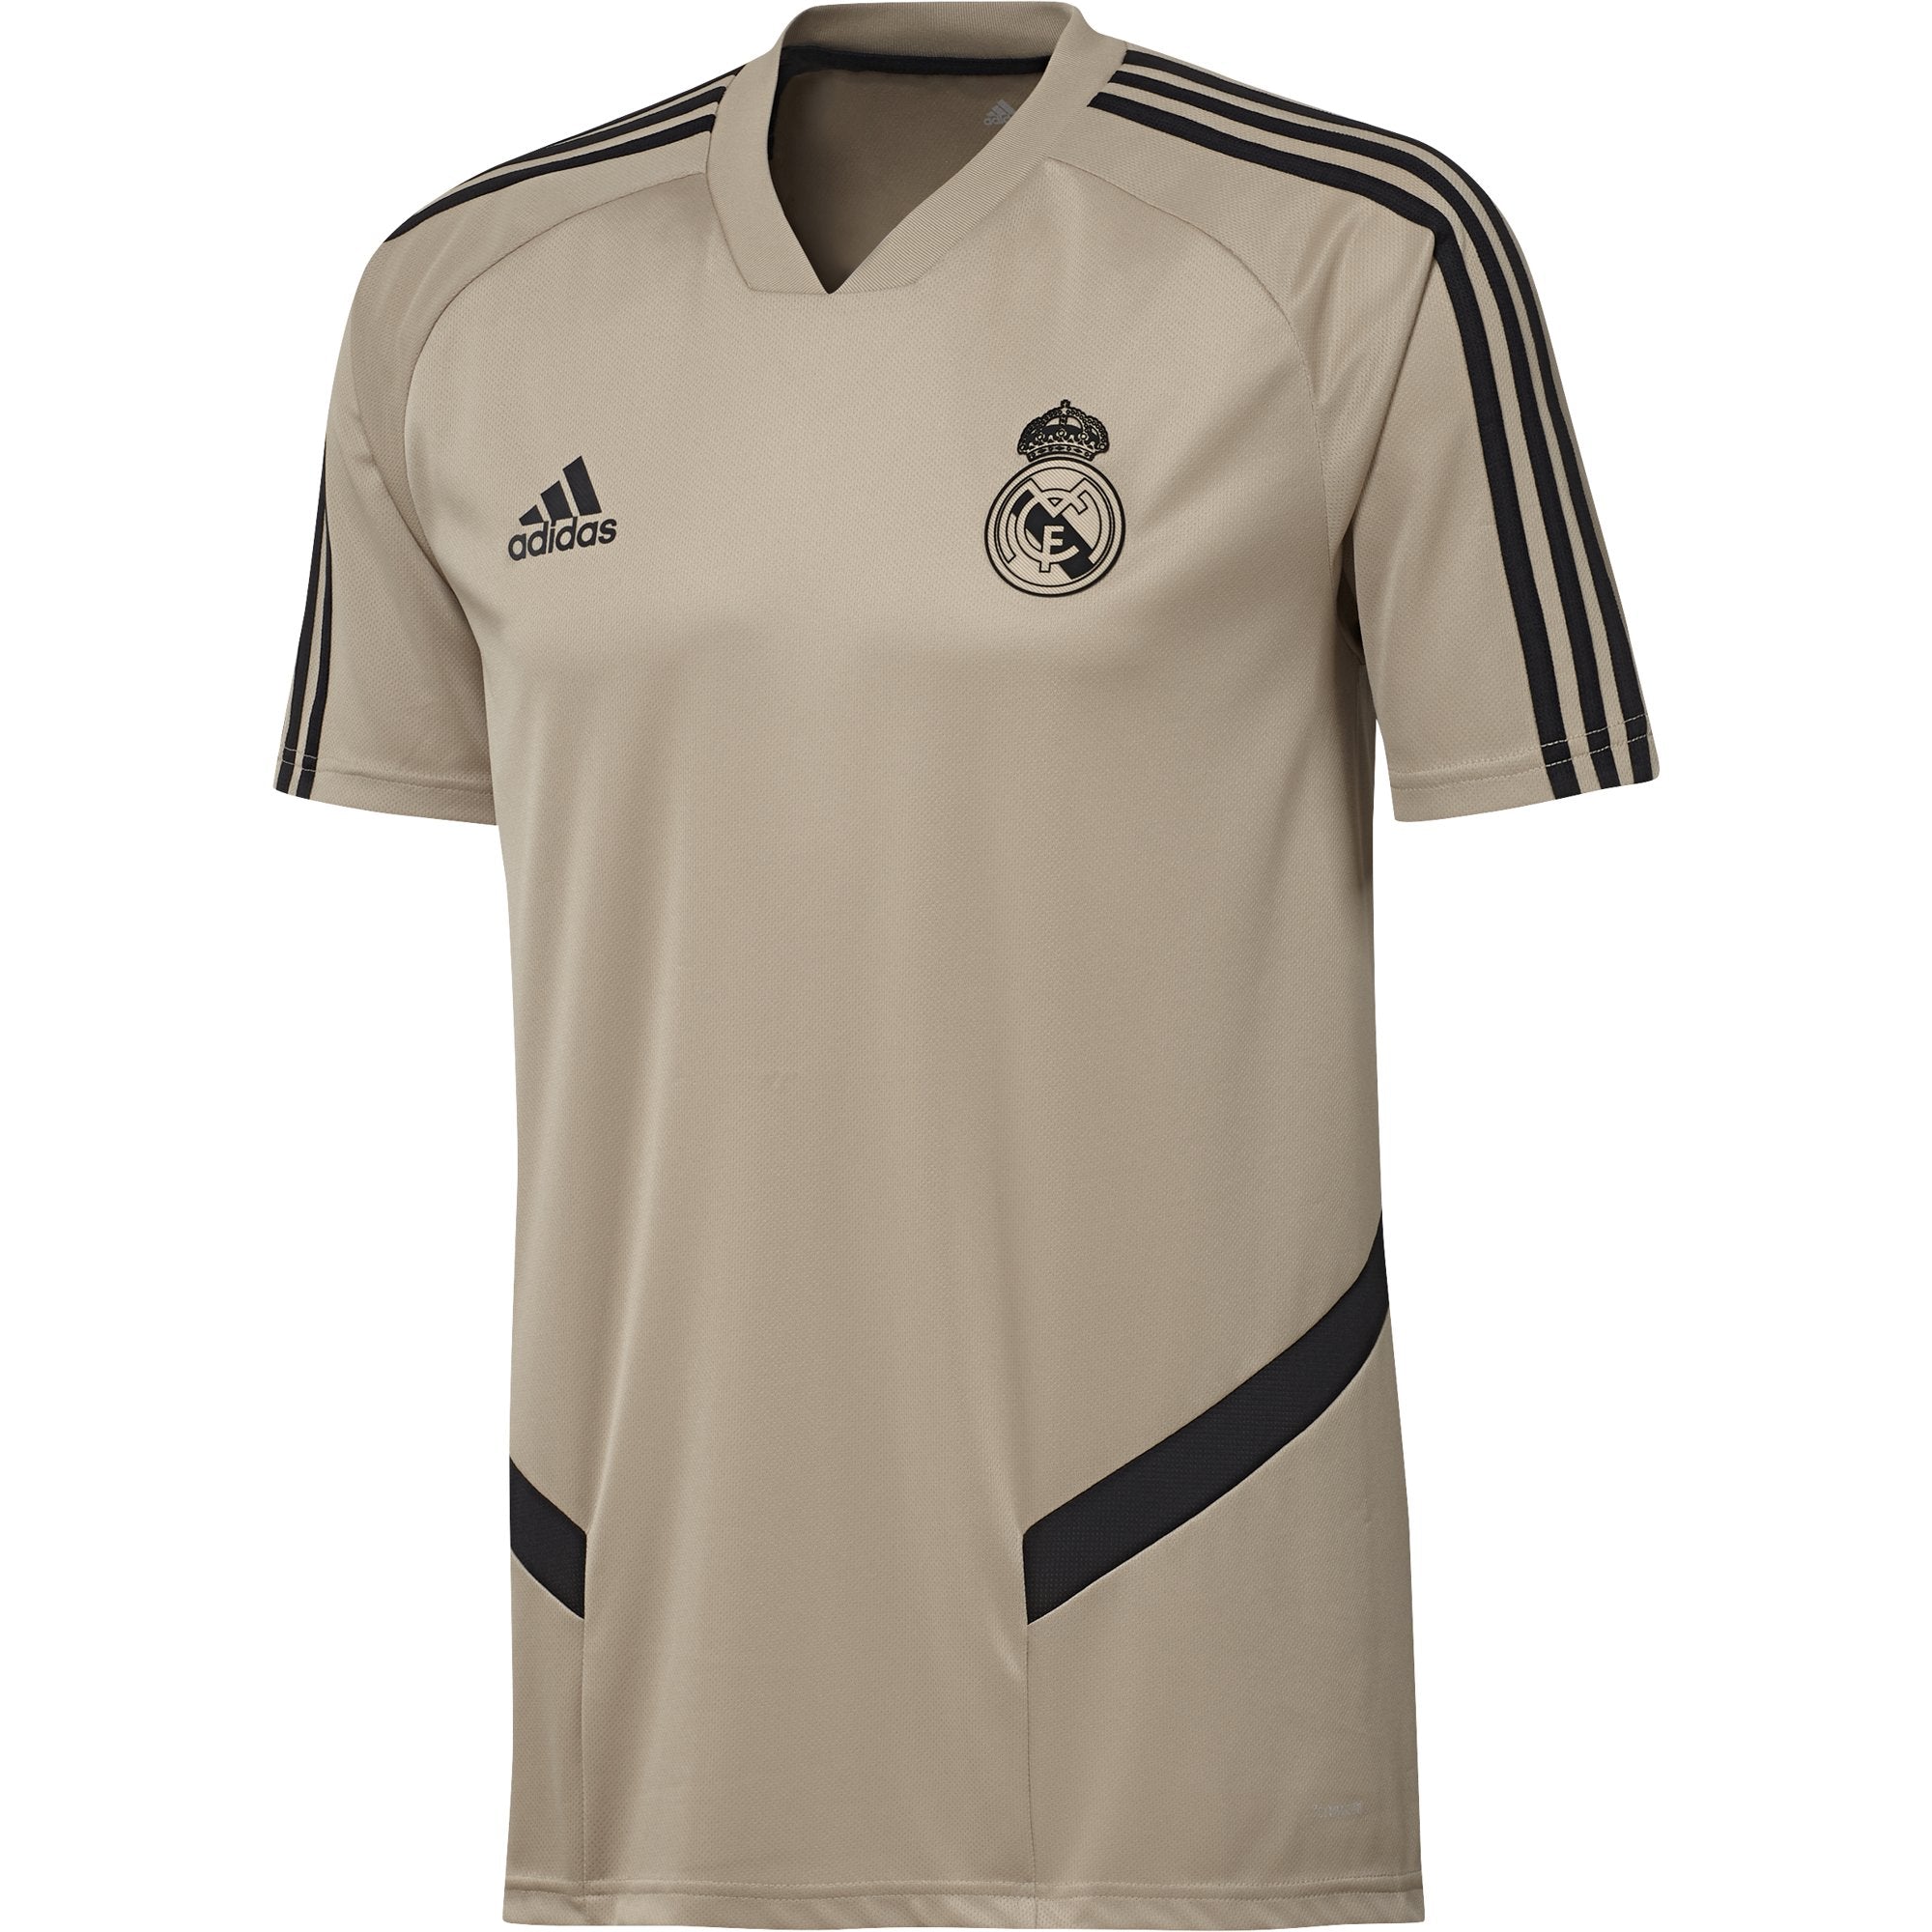 real madrid white and gold jersey